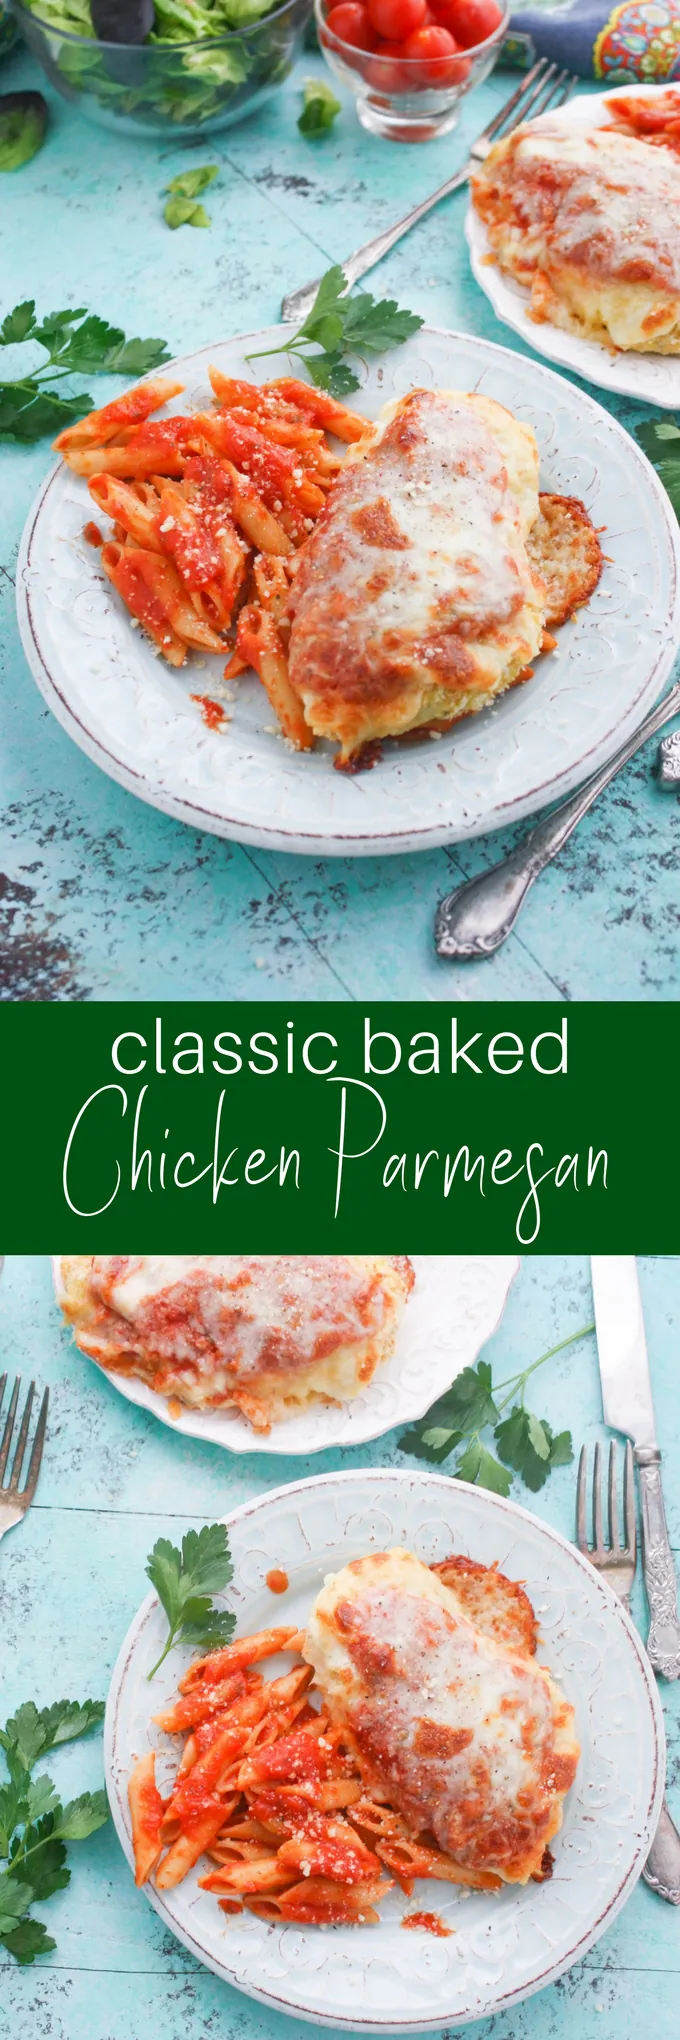 Classic Baked Chicken Parmesan is a restaurant favorite to make at home. Classic Baked Chicken Parmesan will become a favorite in your home!